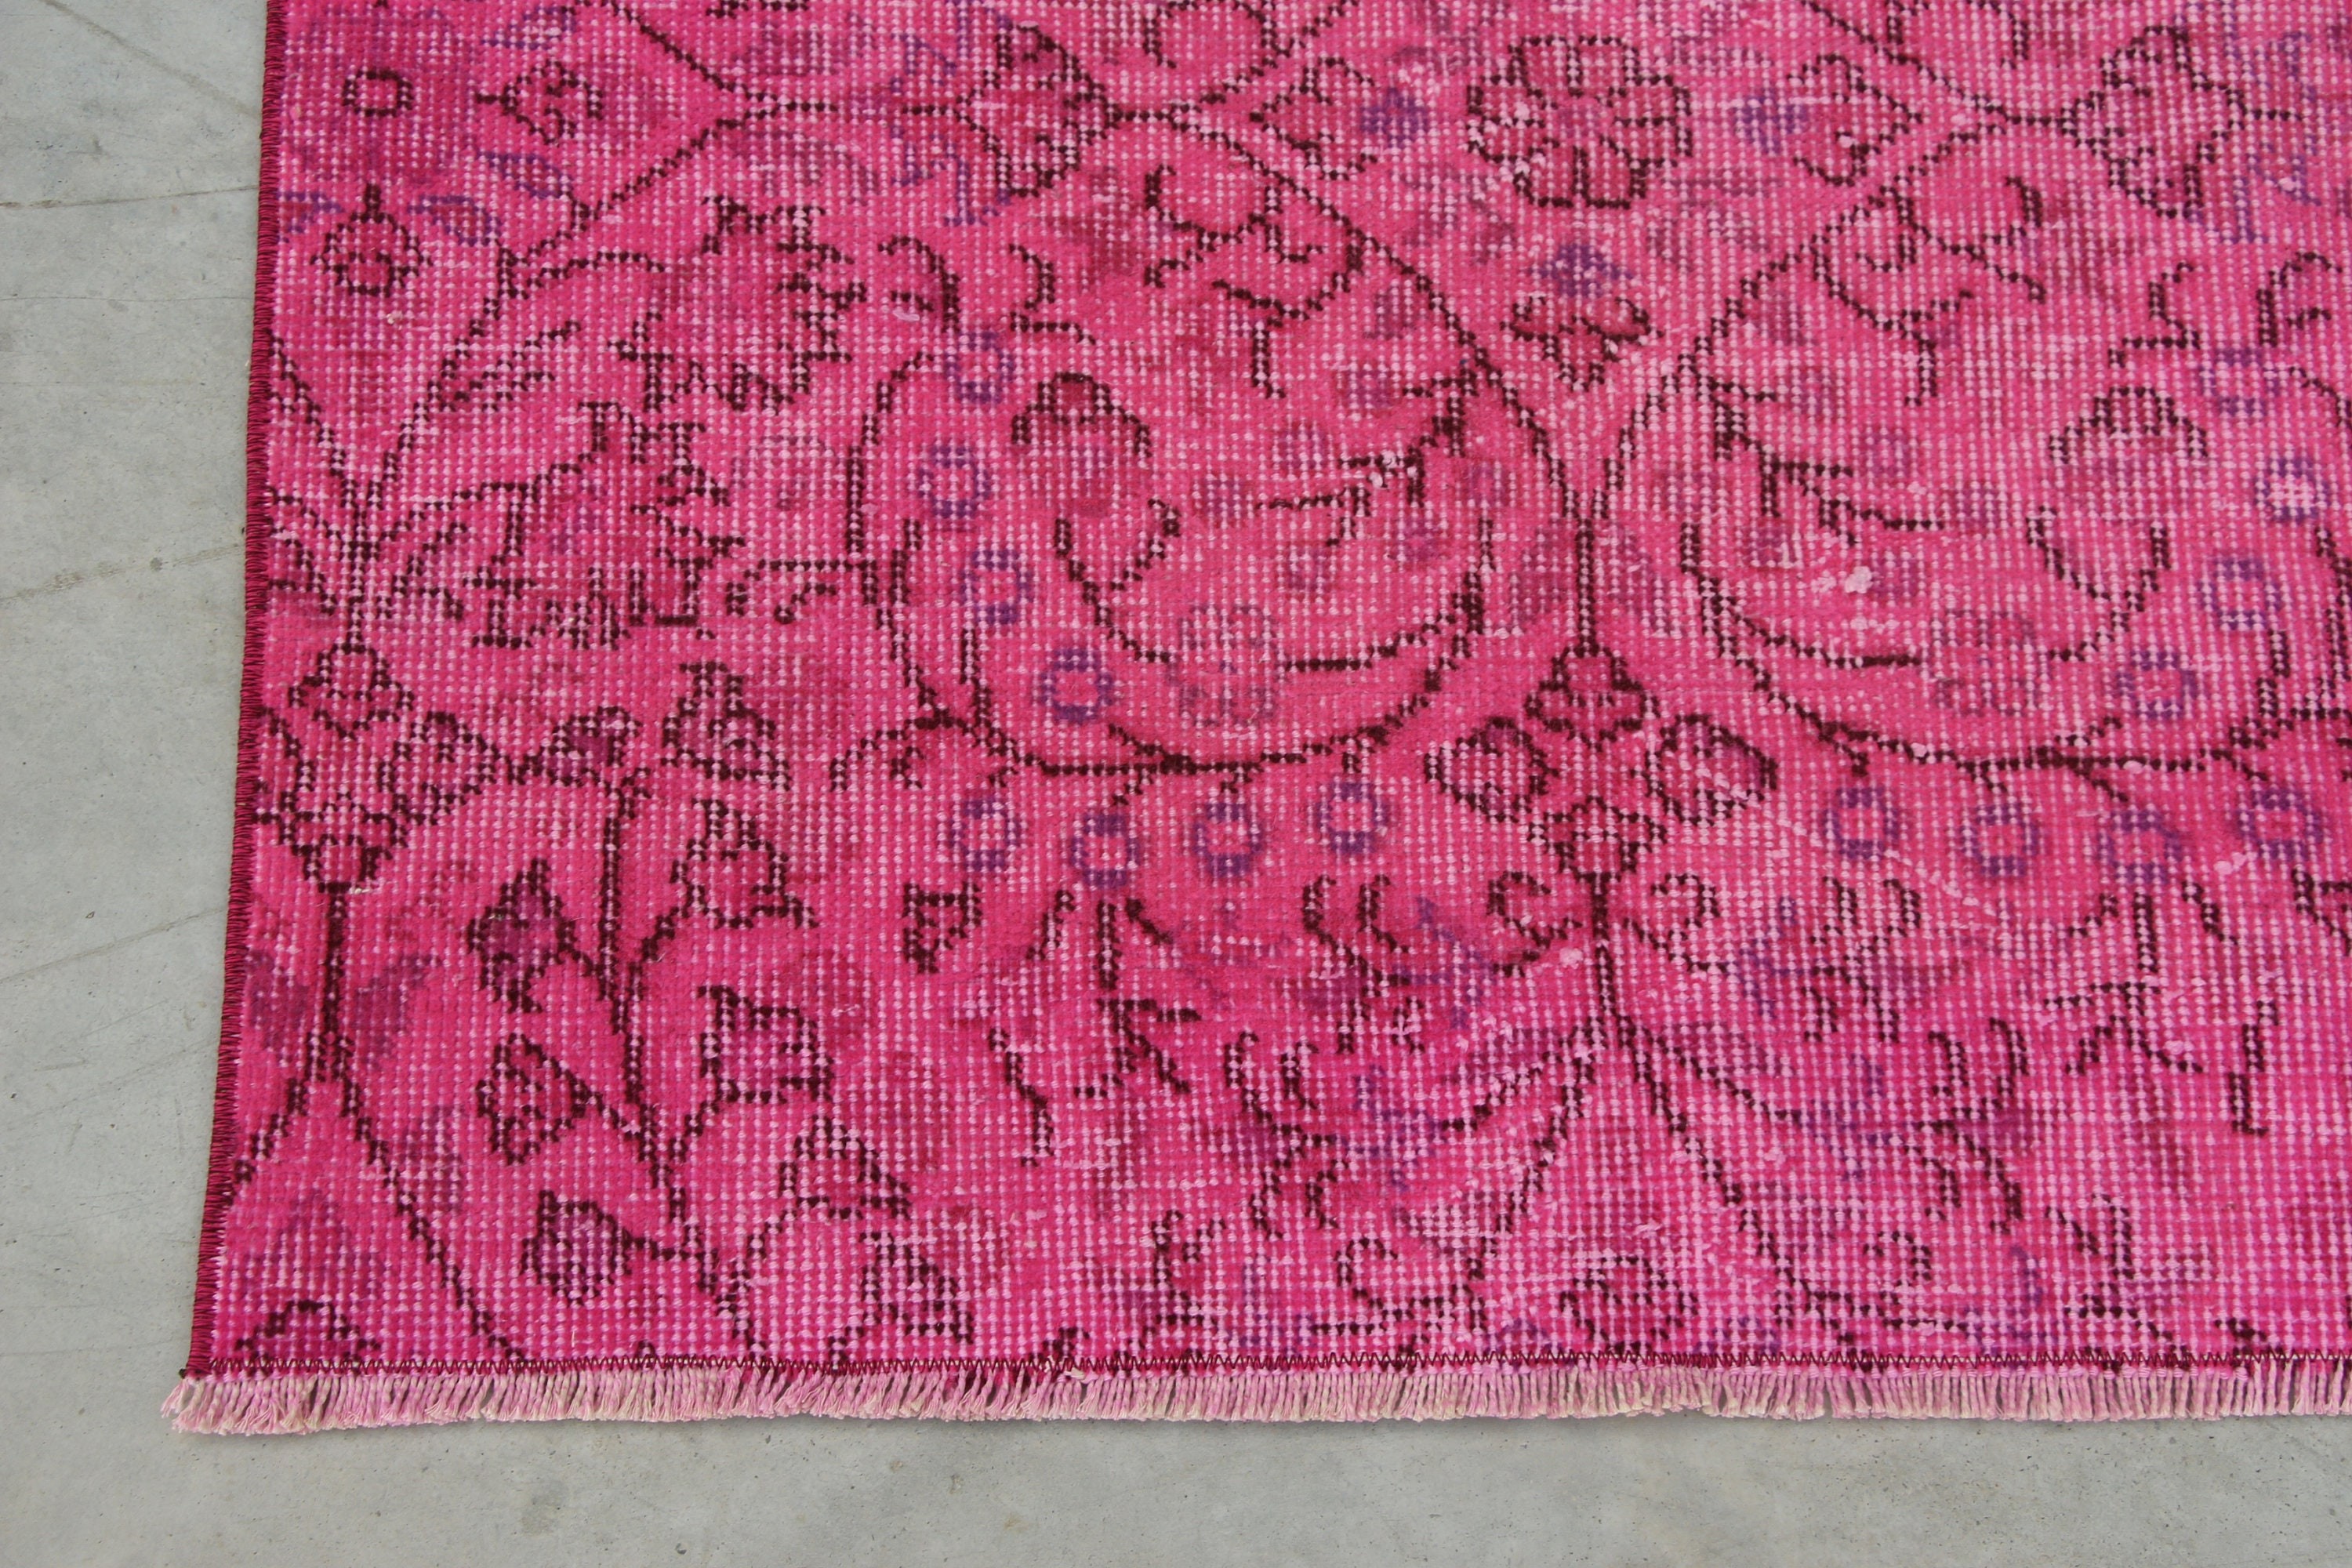 Home Decor Rug, Turkish Rugs, Aztec Rug, 3x6.6 ft Accent Rug, Rugs for Entry, Pink Kitchen Rug, Entry Rugs, Vintage Rug, Anatolian Rug